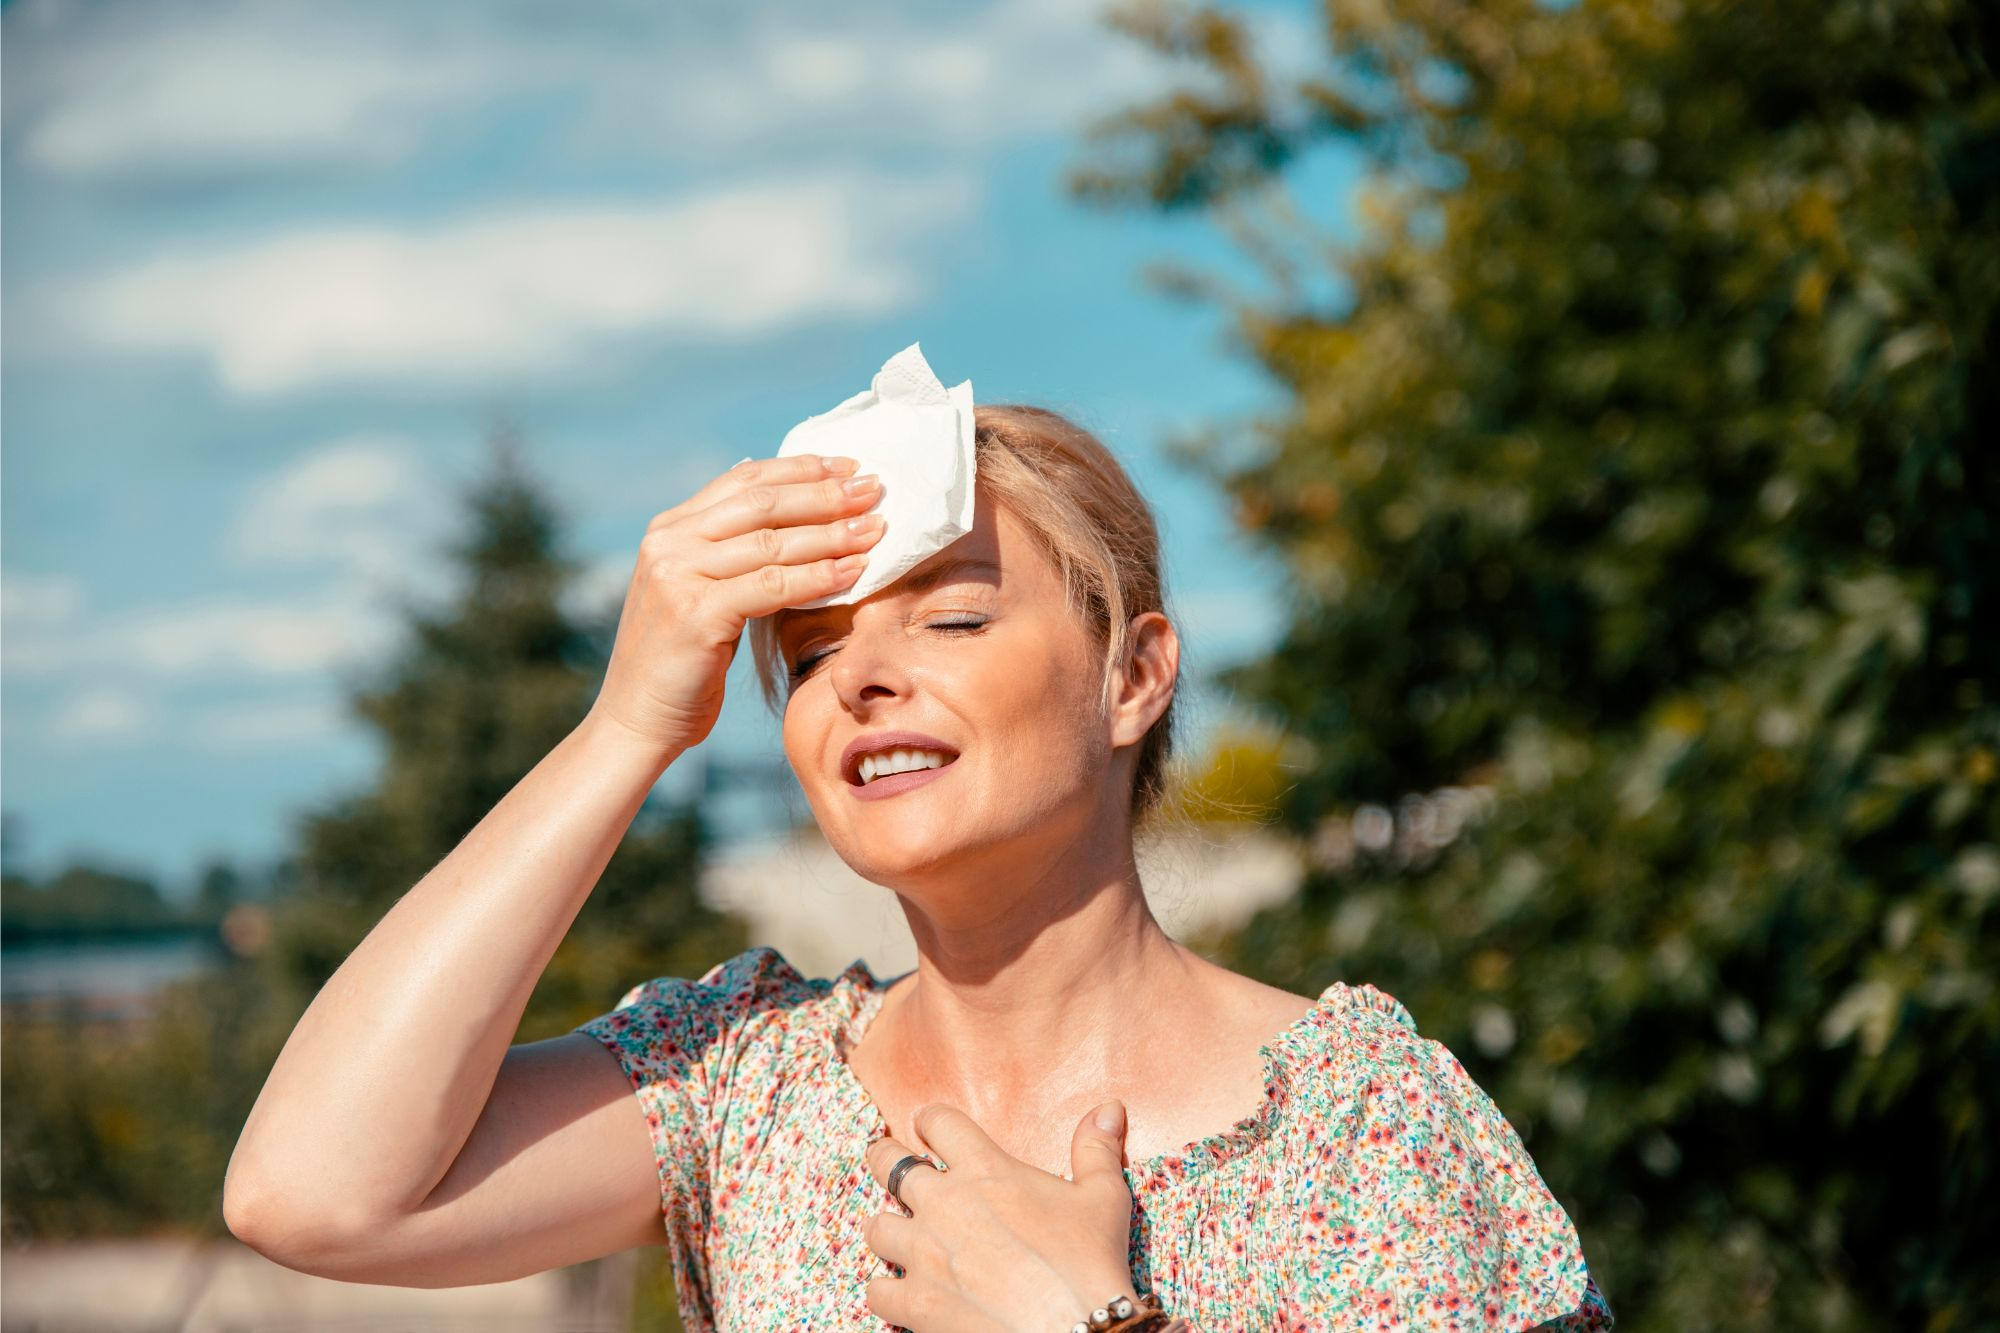 Special Vegan Diet Found To Decrease Hot Flashes by 95%